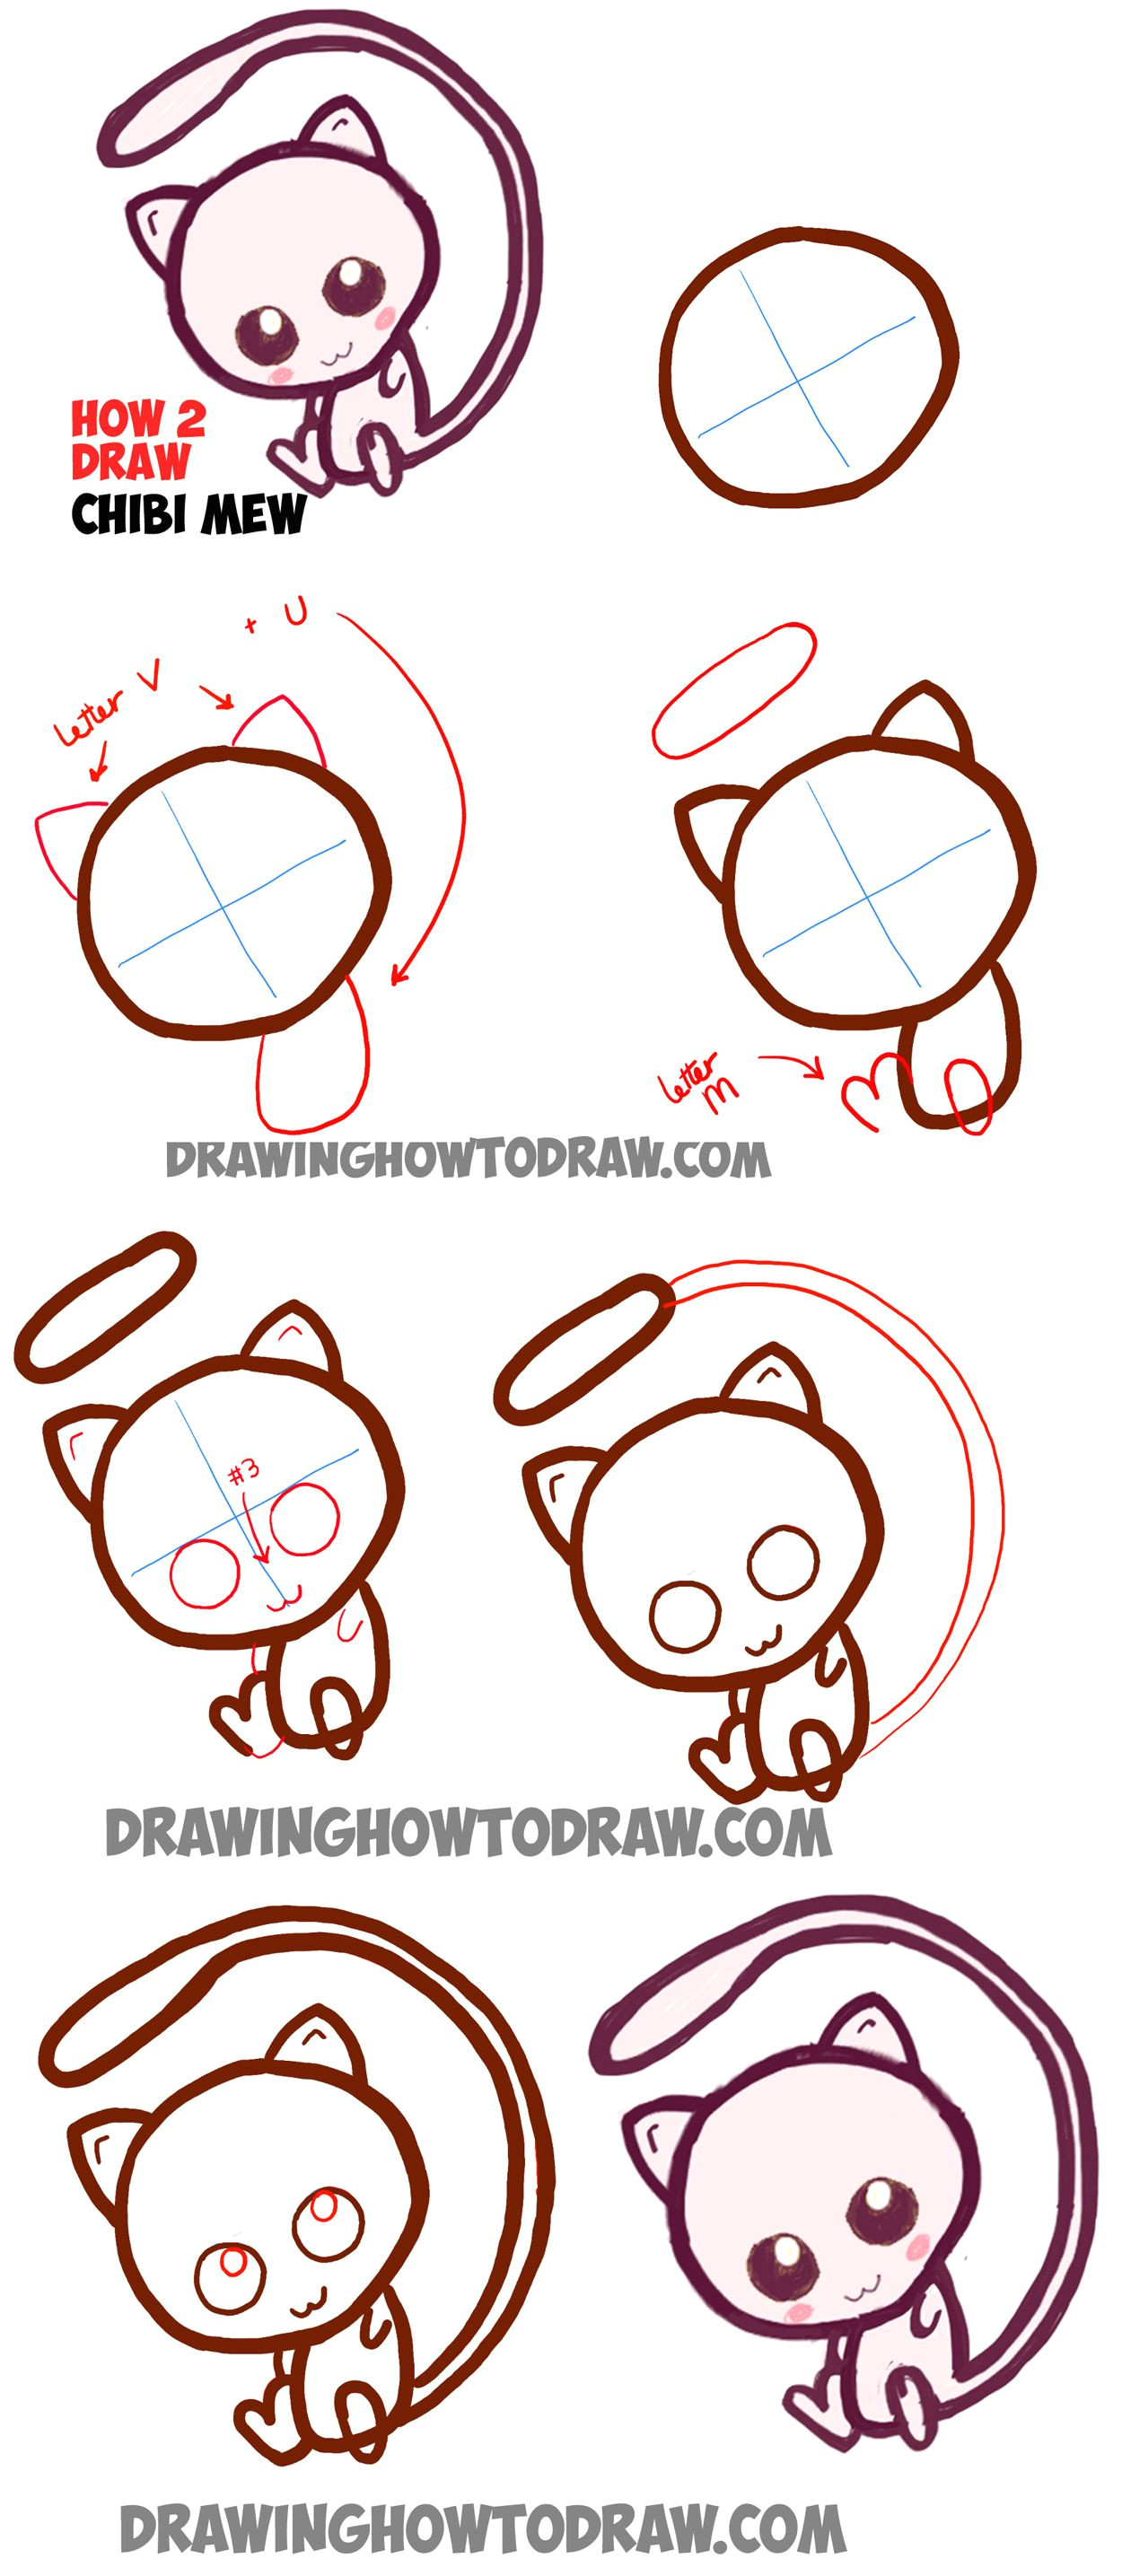 V Cute Drawing How to Draw Cute Baby Chibi Mew From Pokemon Easy Step by Step